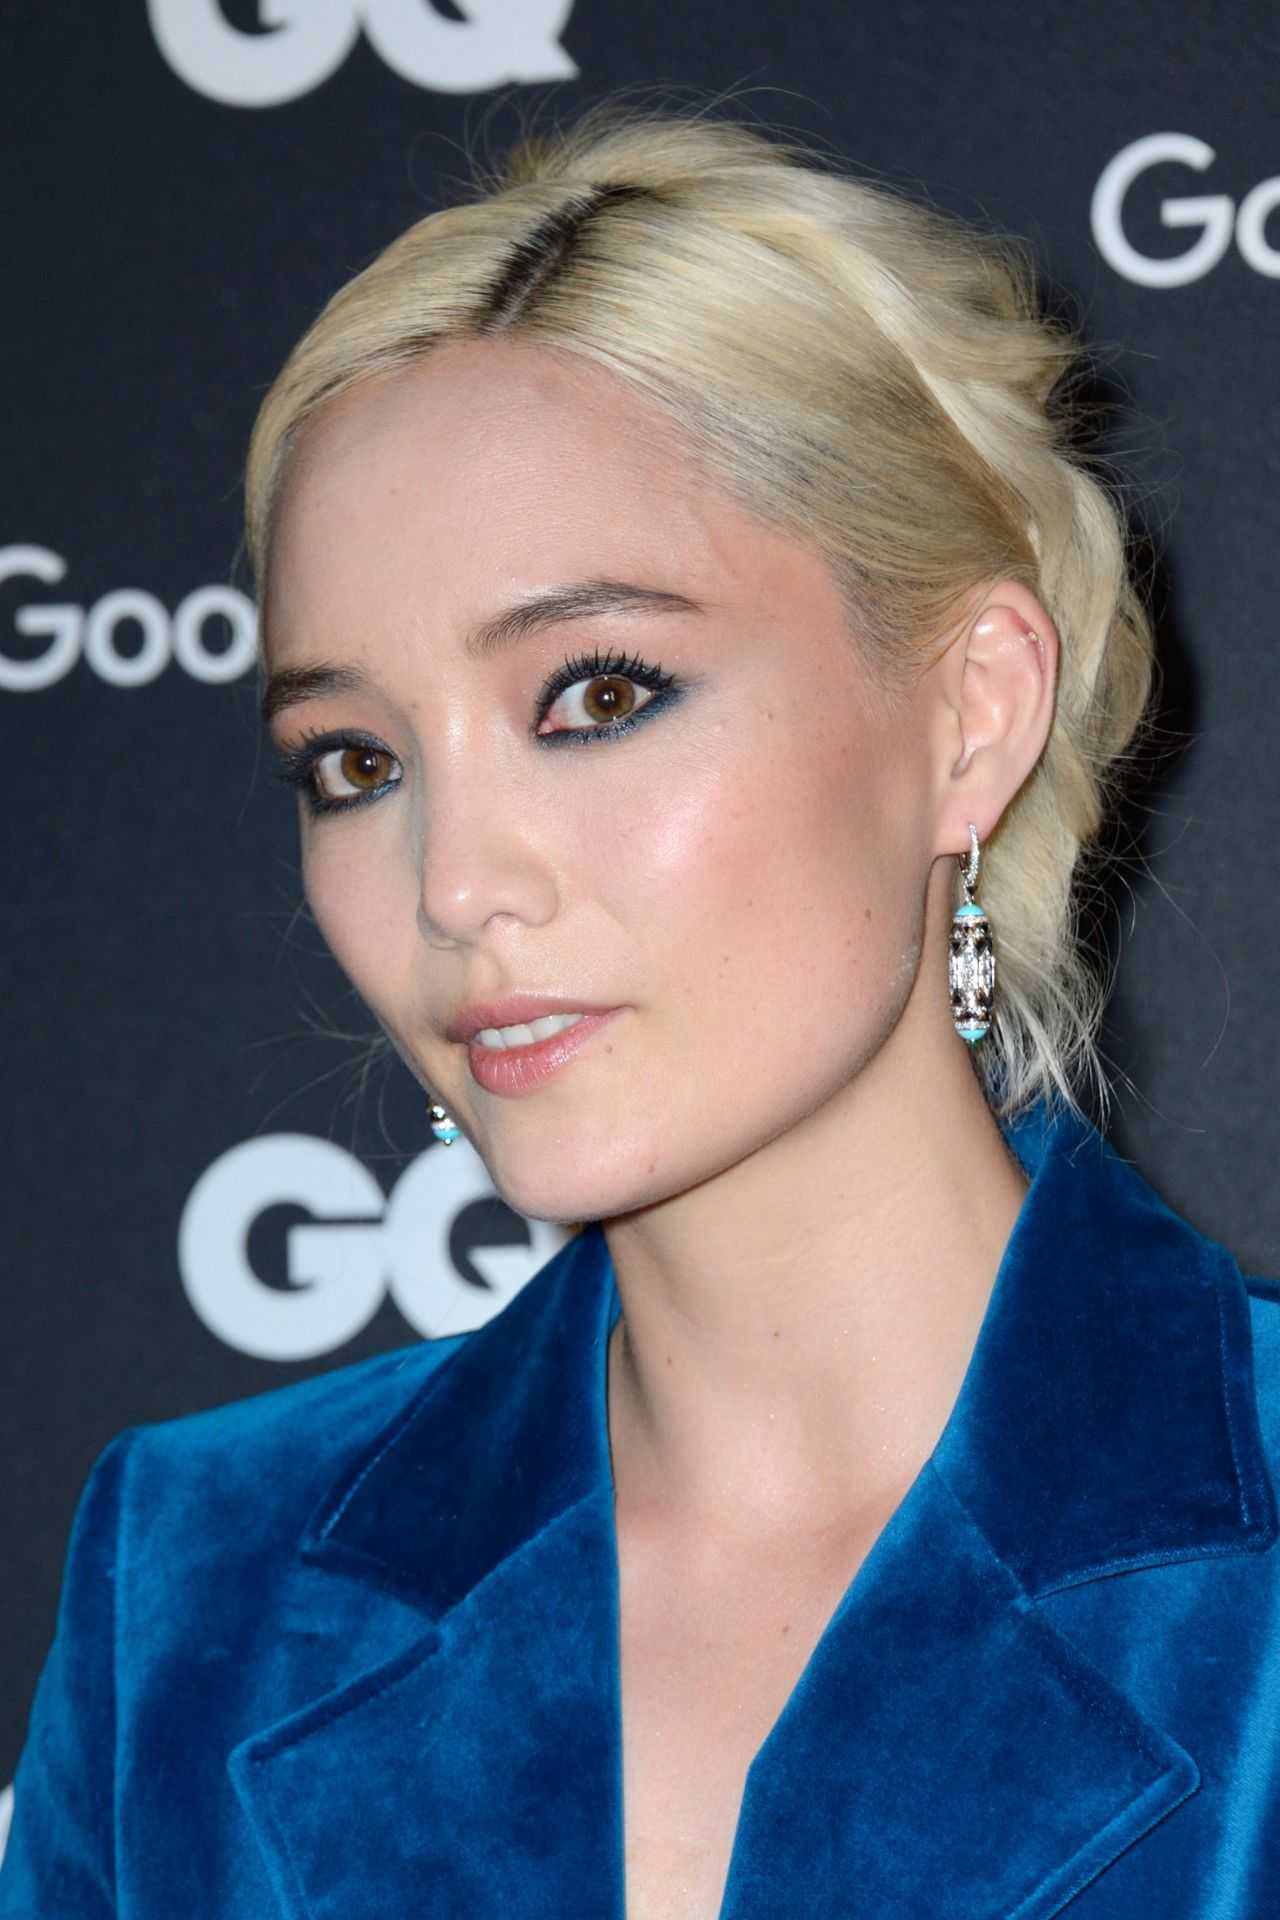 70+ Hot Pictures Of Pom Klementieff Who Plays Mantis In Marvel Cinematic Universe 154